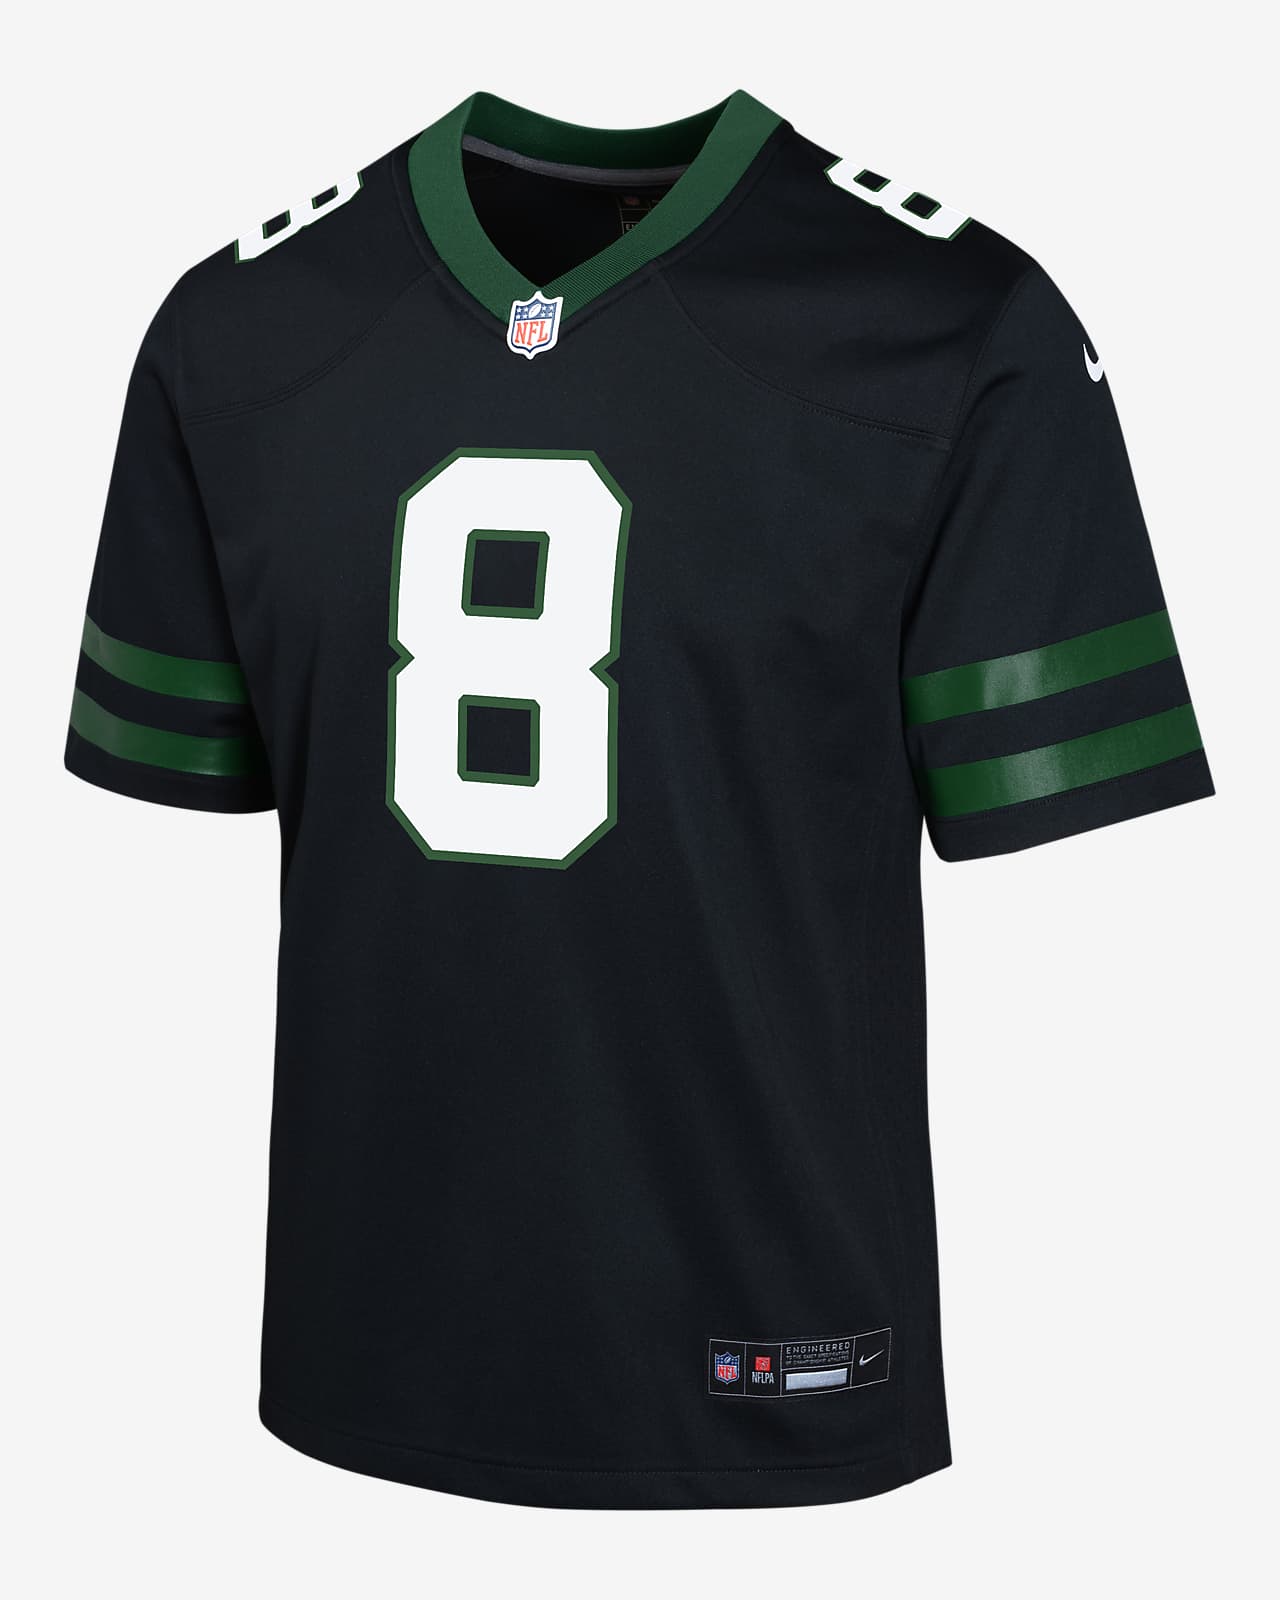 Aaron Rodgers New York Jets Big Kids' Nike NFL Game Jersey